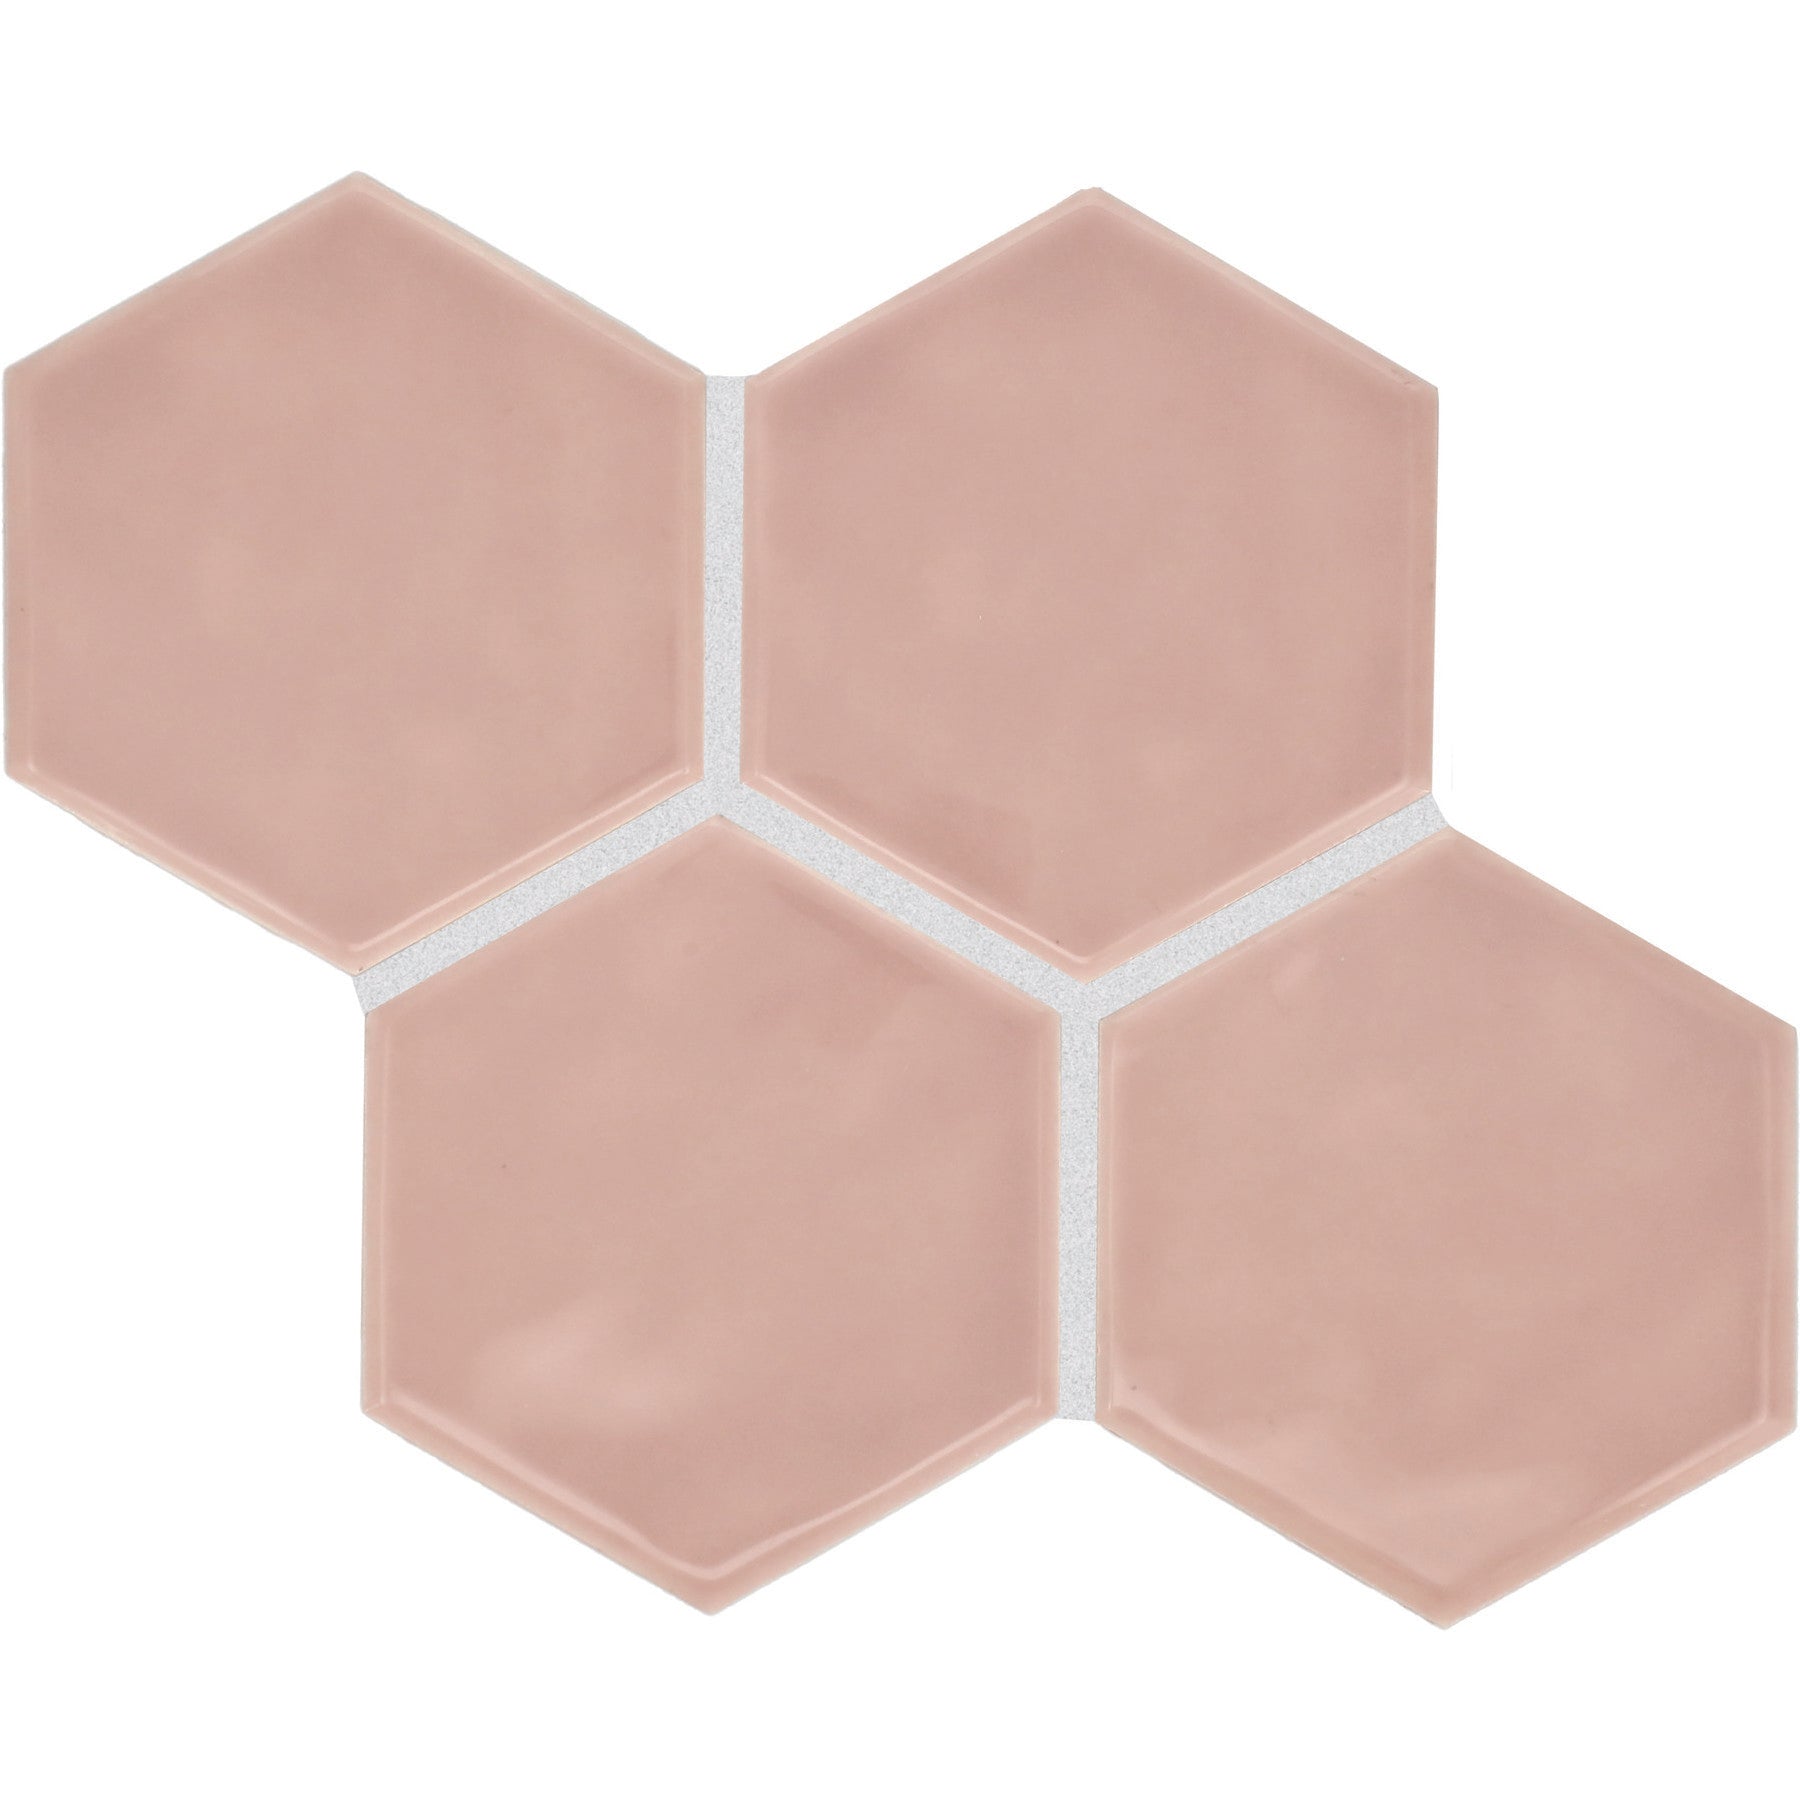 American Olean - Playscapes Hex Wall Tile - Peony PS75